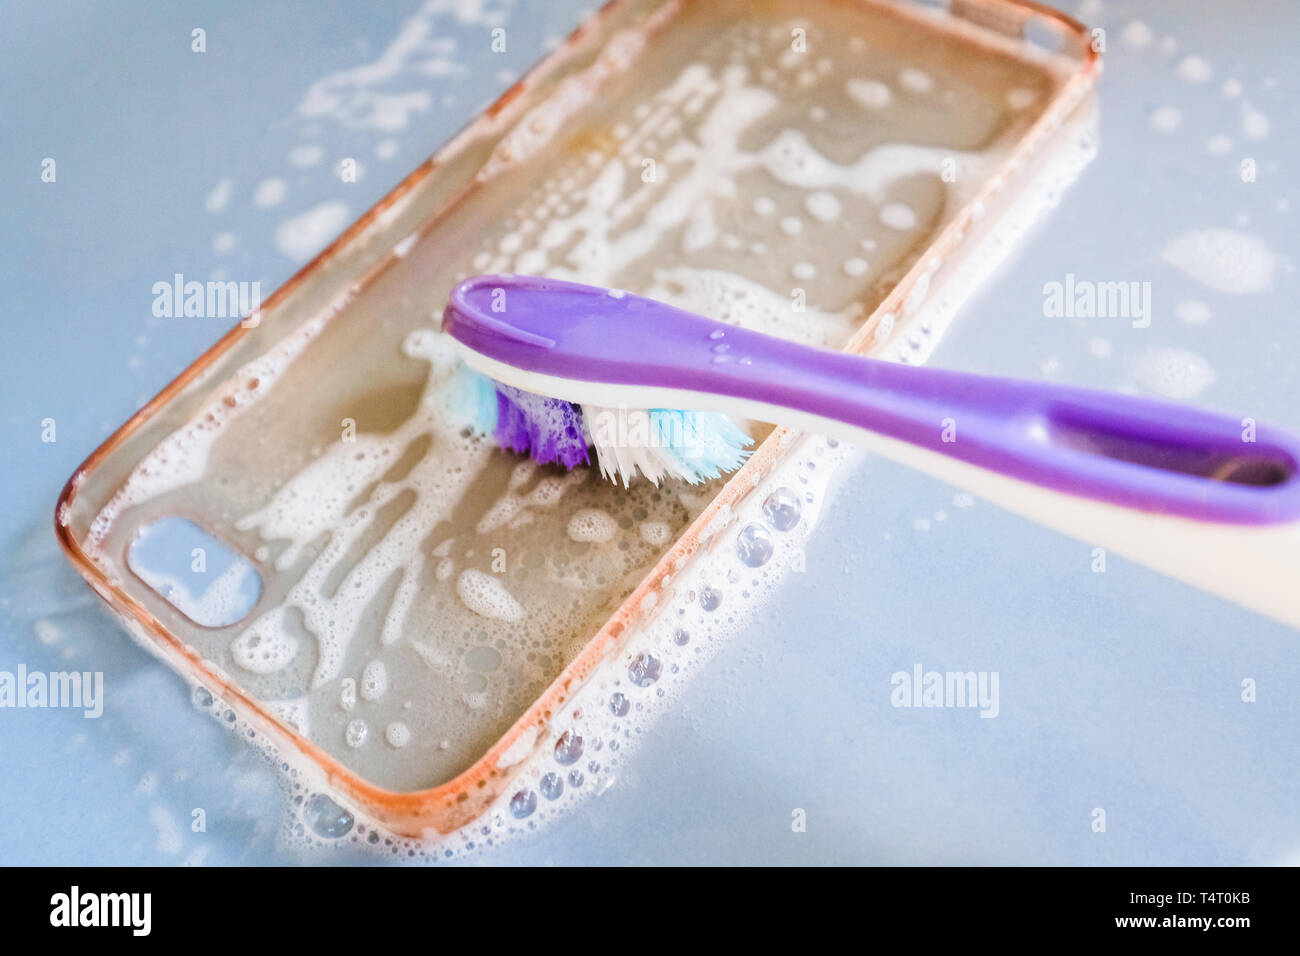 Cleaning the silicone phone case with toothbrush, foam and soap